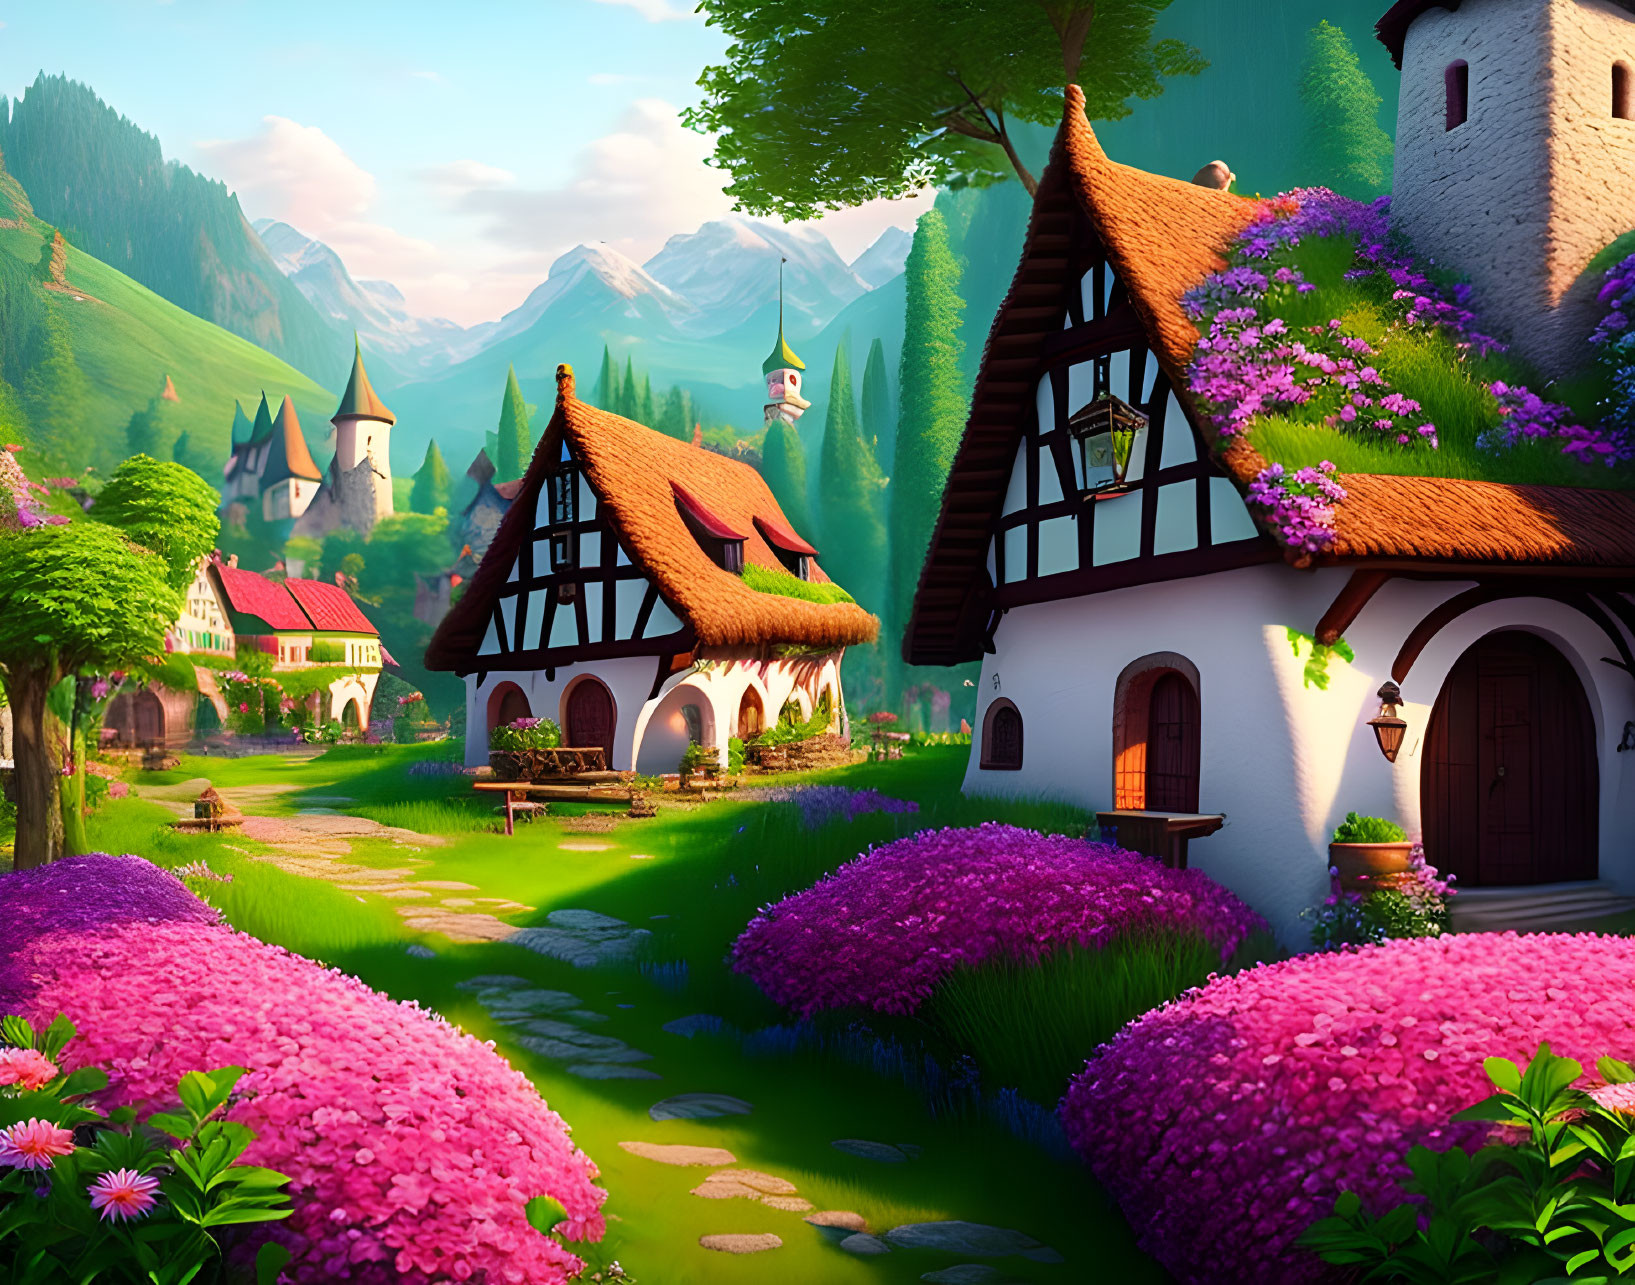 Colorful village scene with half-timbered houses, pink flowers, mountains, and blue sky